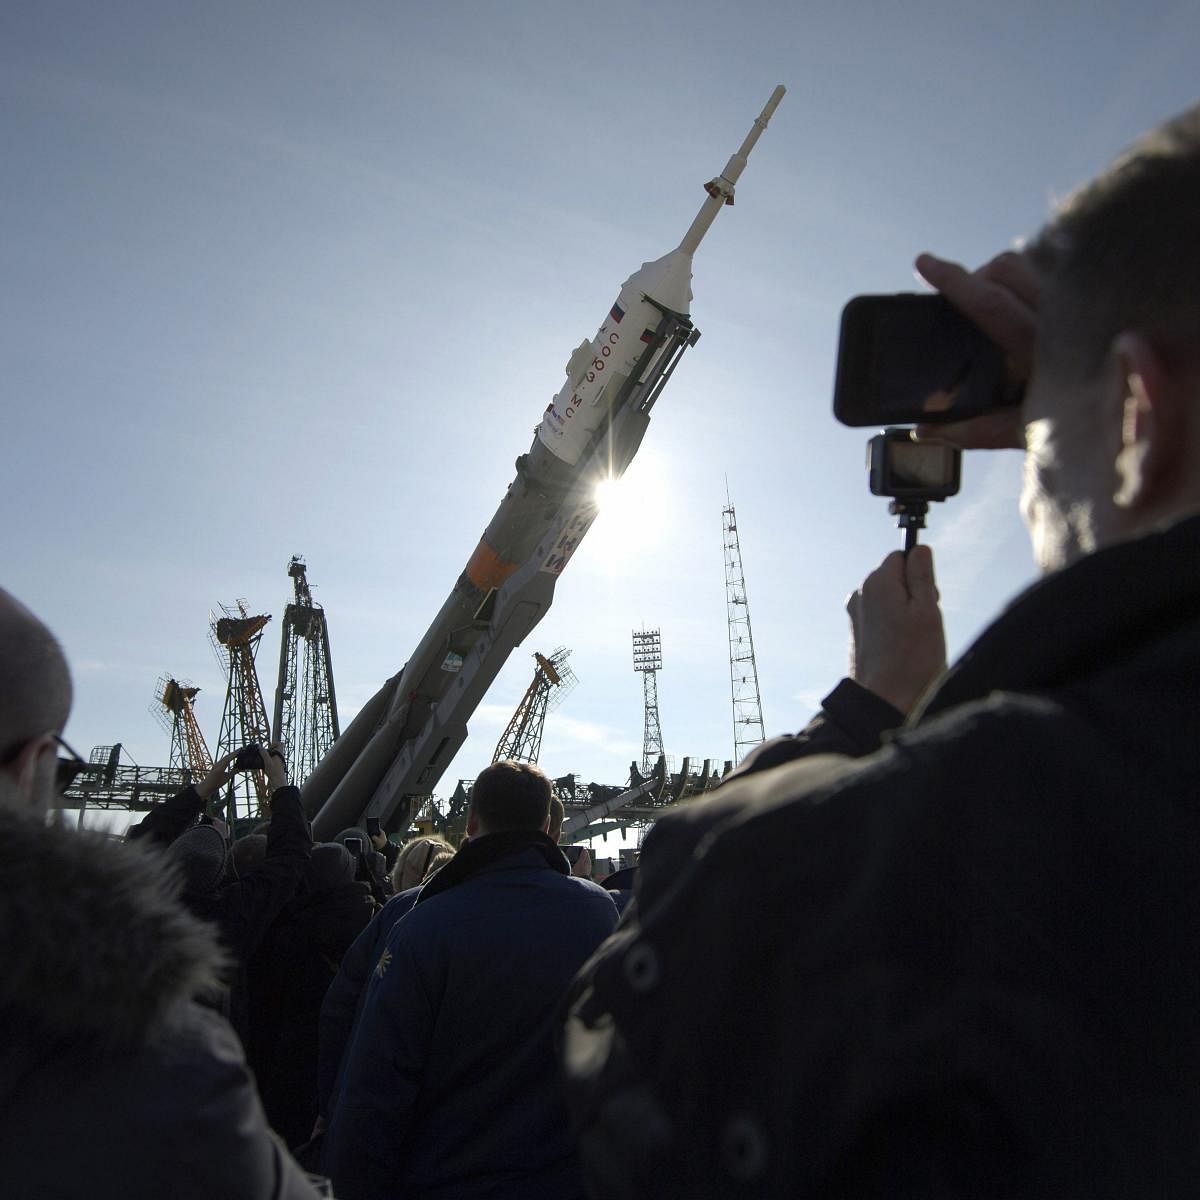 In this photo provided by NASA, the Soyuz rocket is raised into vertical position on the launch pad at the Baikonur Cosmodrome in Kazakhstan on Tuesday, March 12, 2019. Expedition 59 crew members Nick Hague and Christina Koch of NASA, along with Alexei Ovchinin of Roscosmos, will launch March 14 on the Soyuz MS-12 spacecraft from the Baikonur Cosmodrome for a six and a half month mission on the International Space Station. AP/PTI